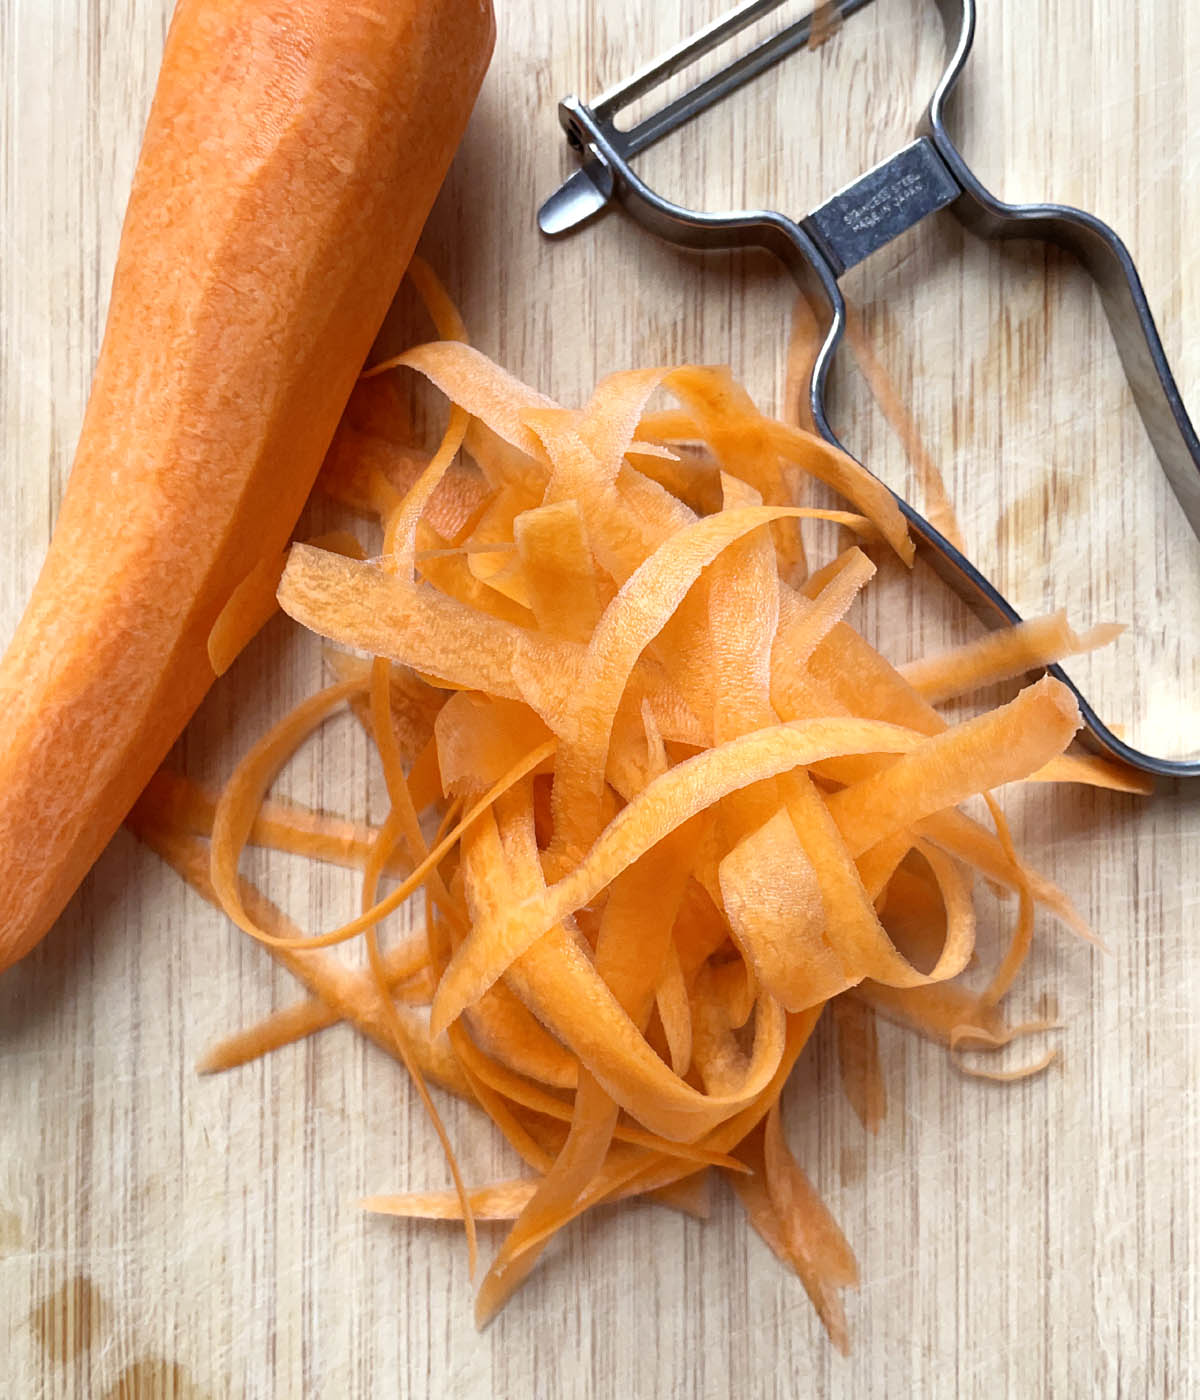 A carrot, a vegetable peeler, and carrot peelings on a wooden cutting board.